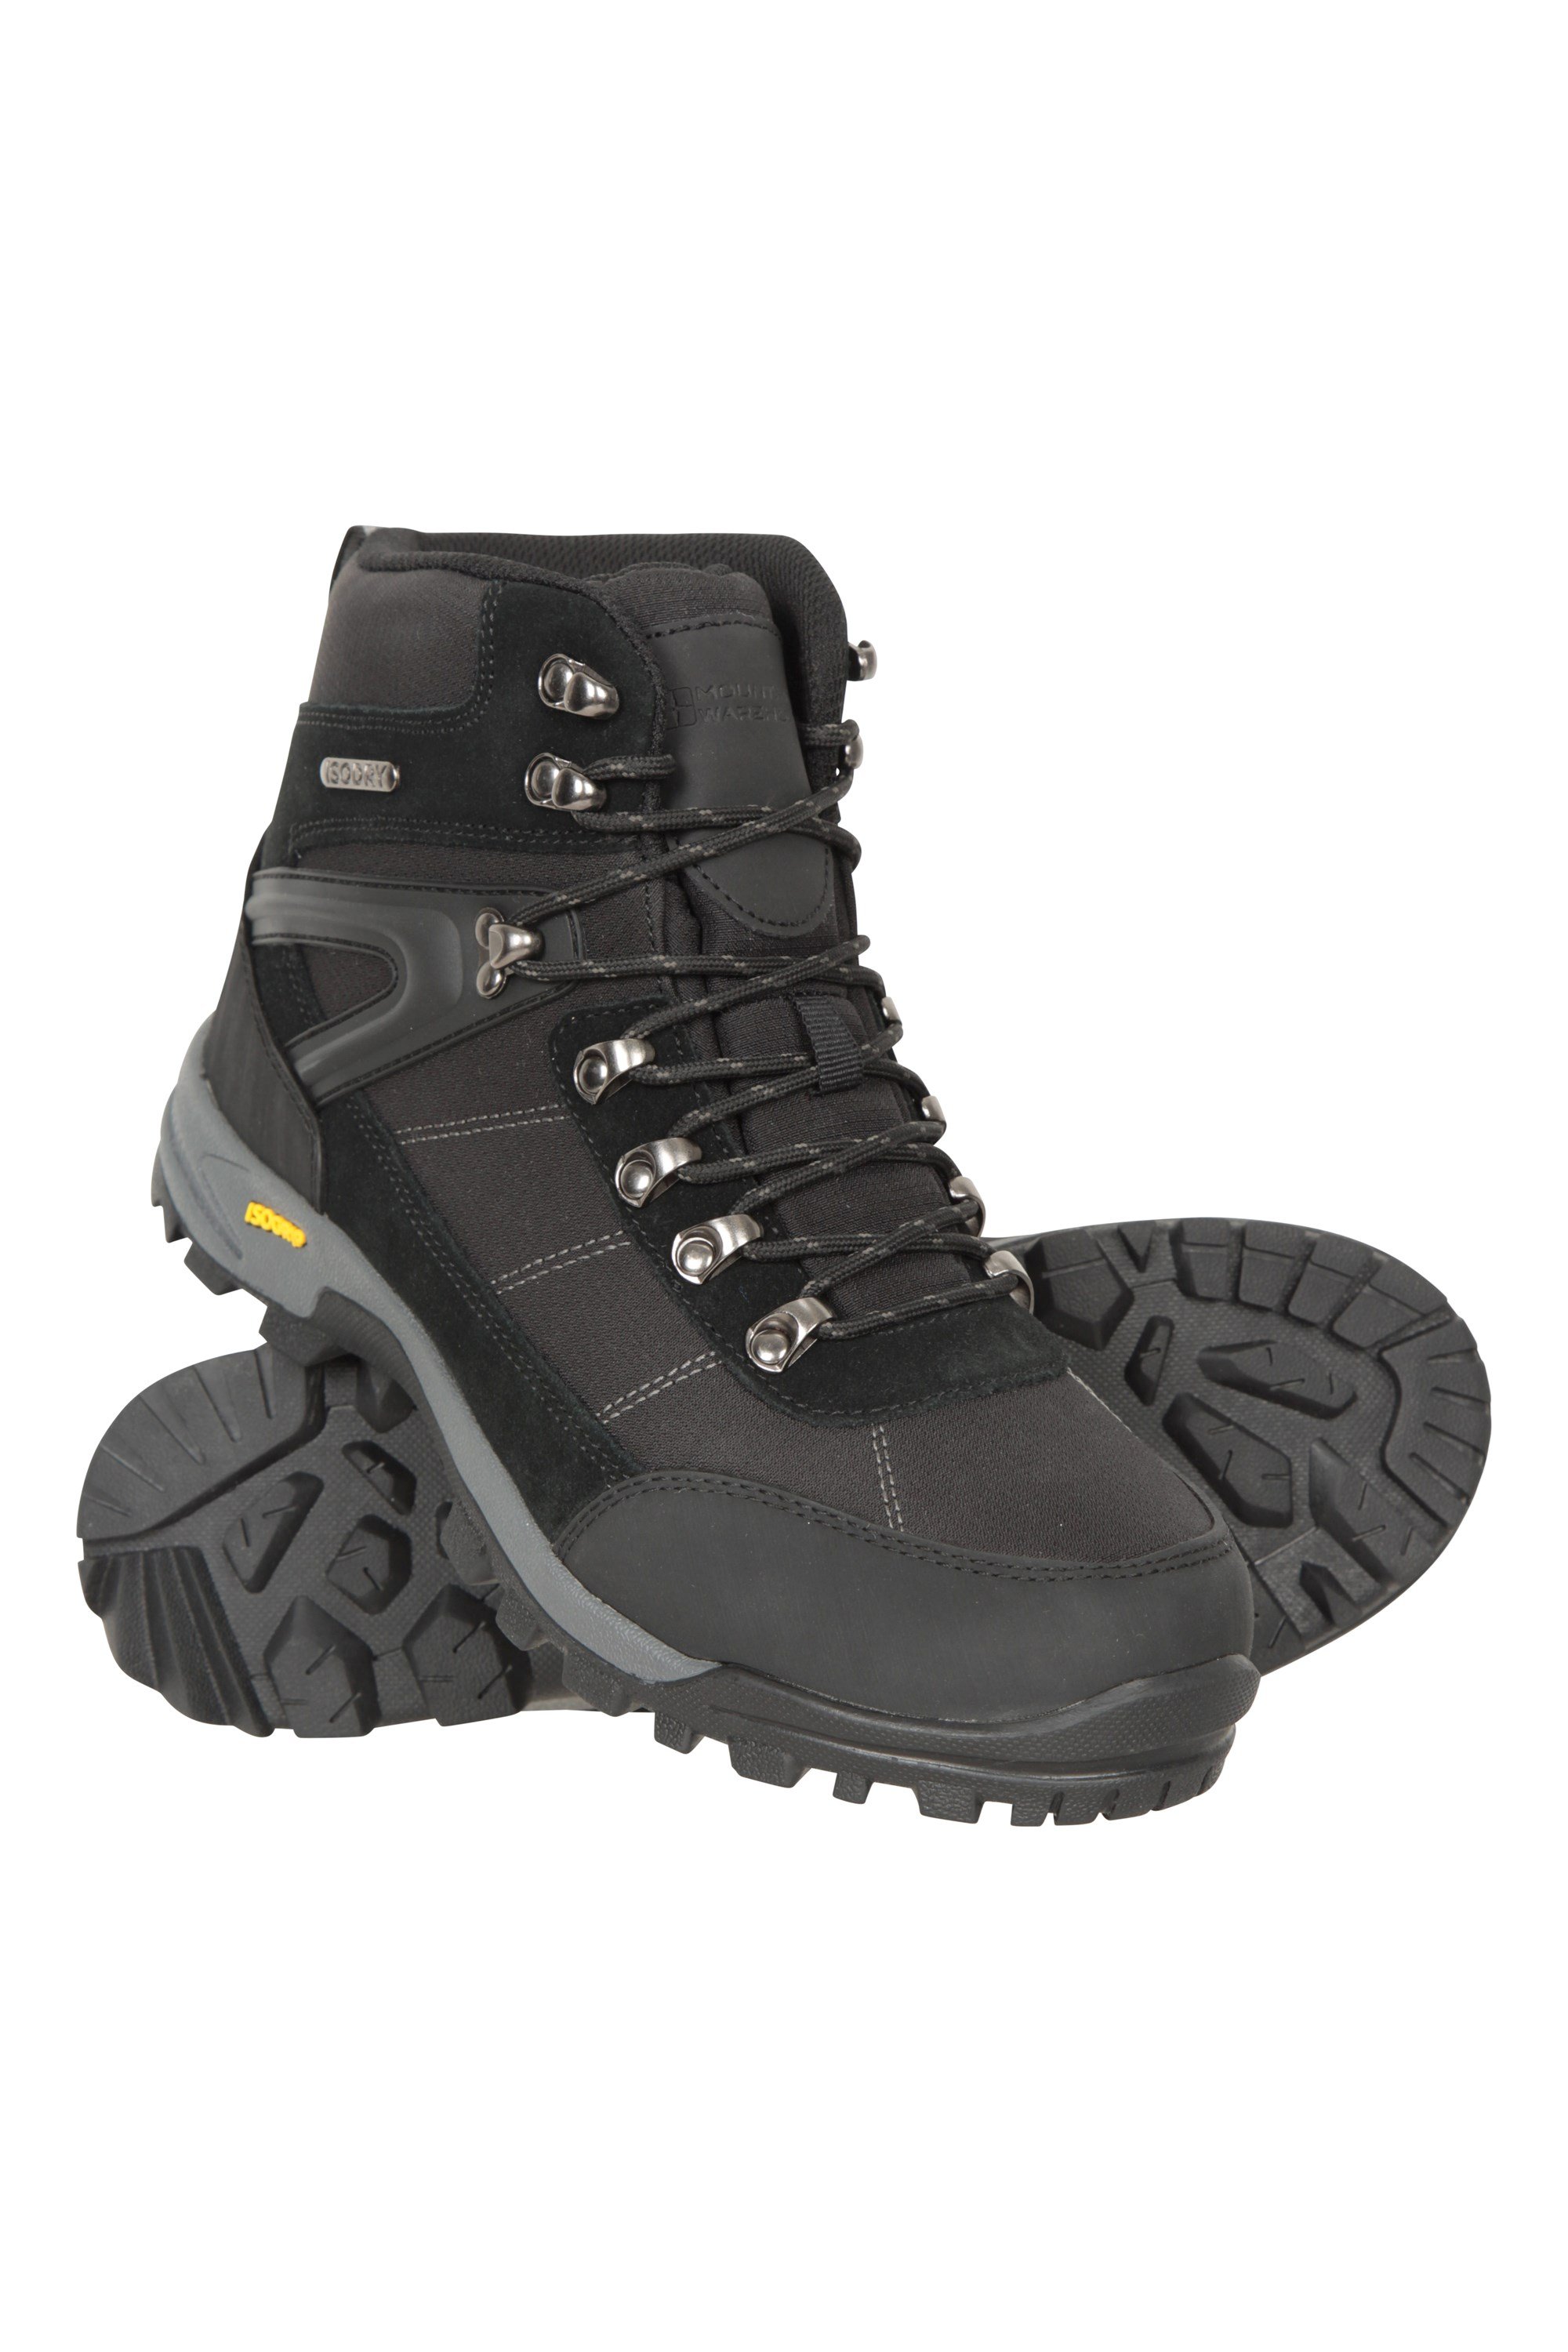 Storm Extreme Mens Isogrip Waterproof Hiking Boots - Black